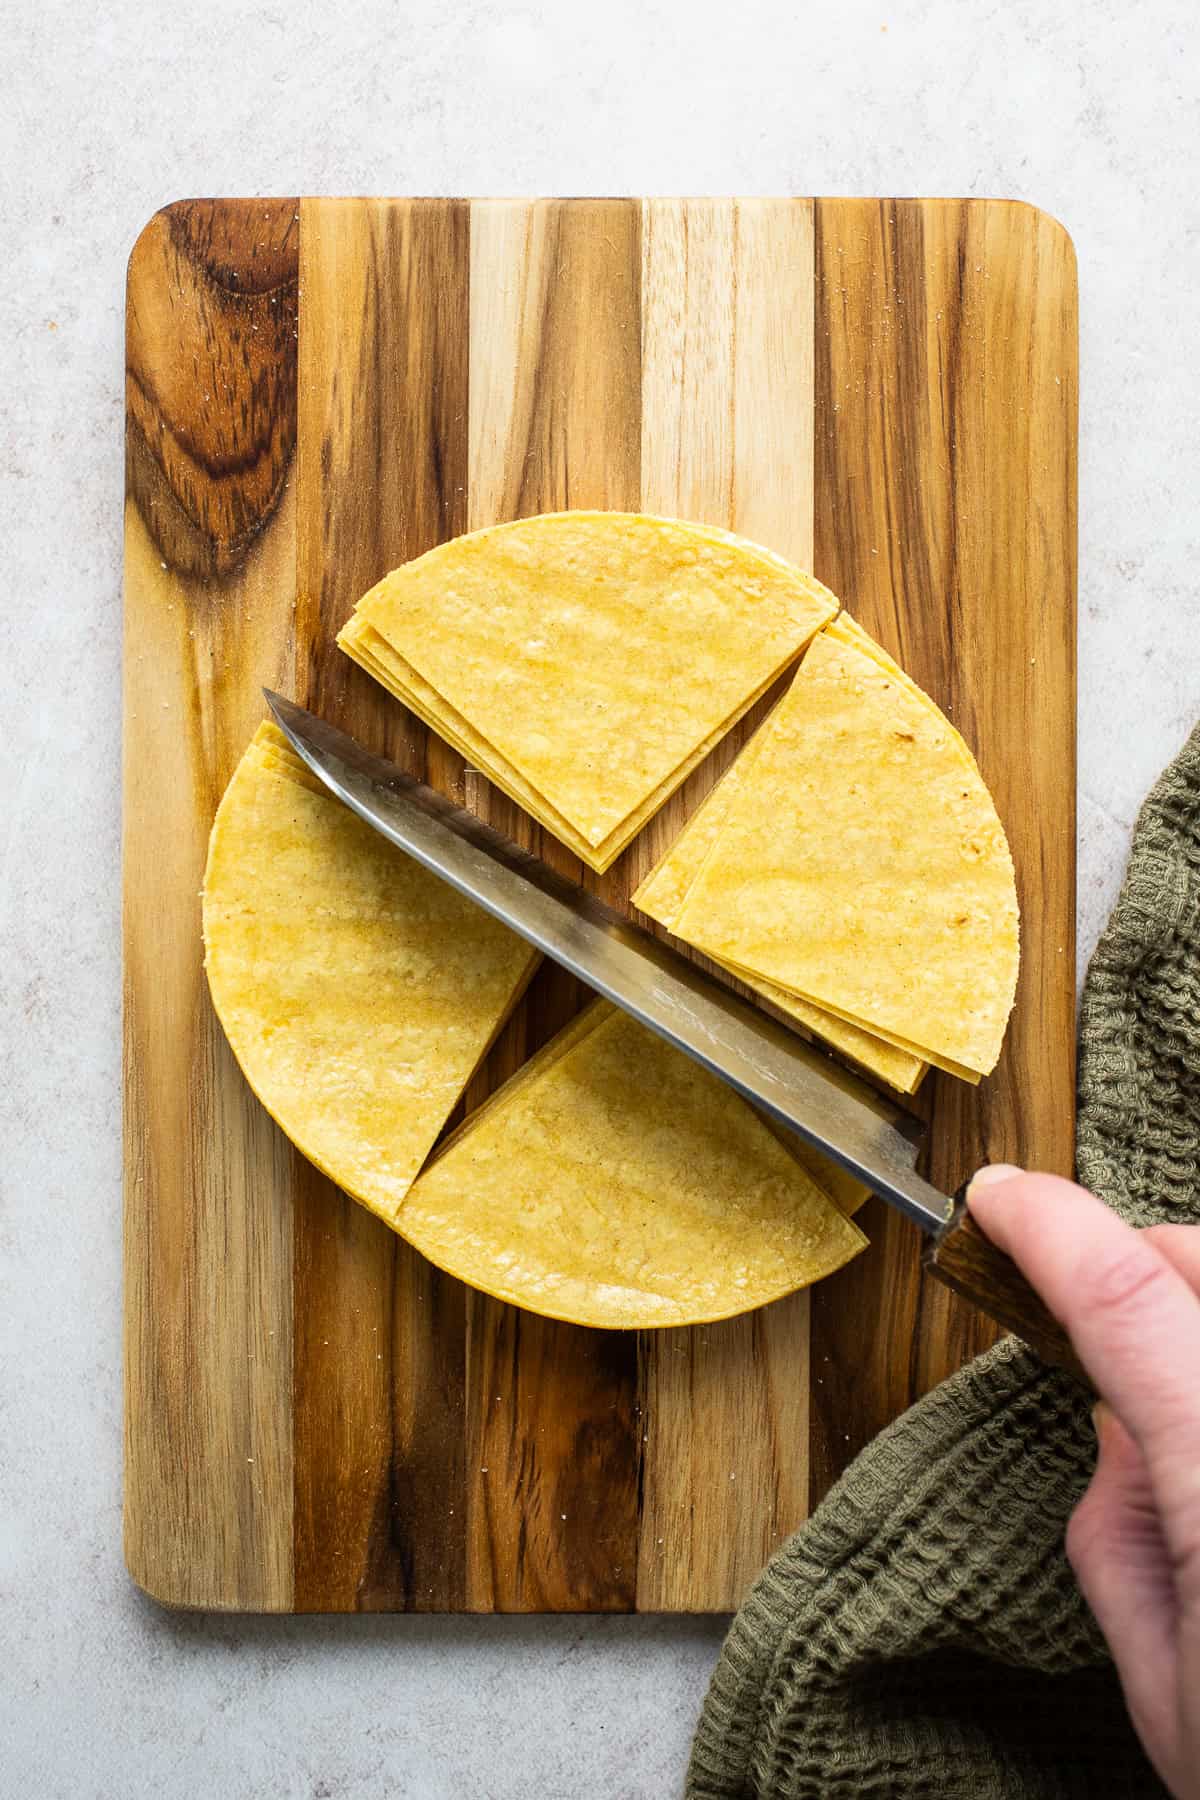 Corn tortillas being cut into triangle wedges for baked tortilla chips.